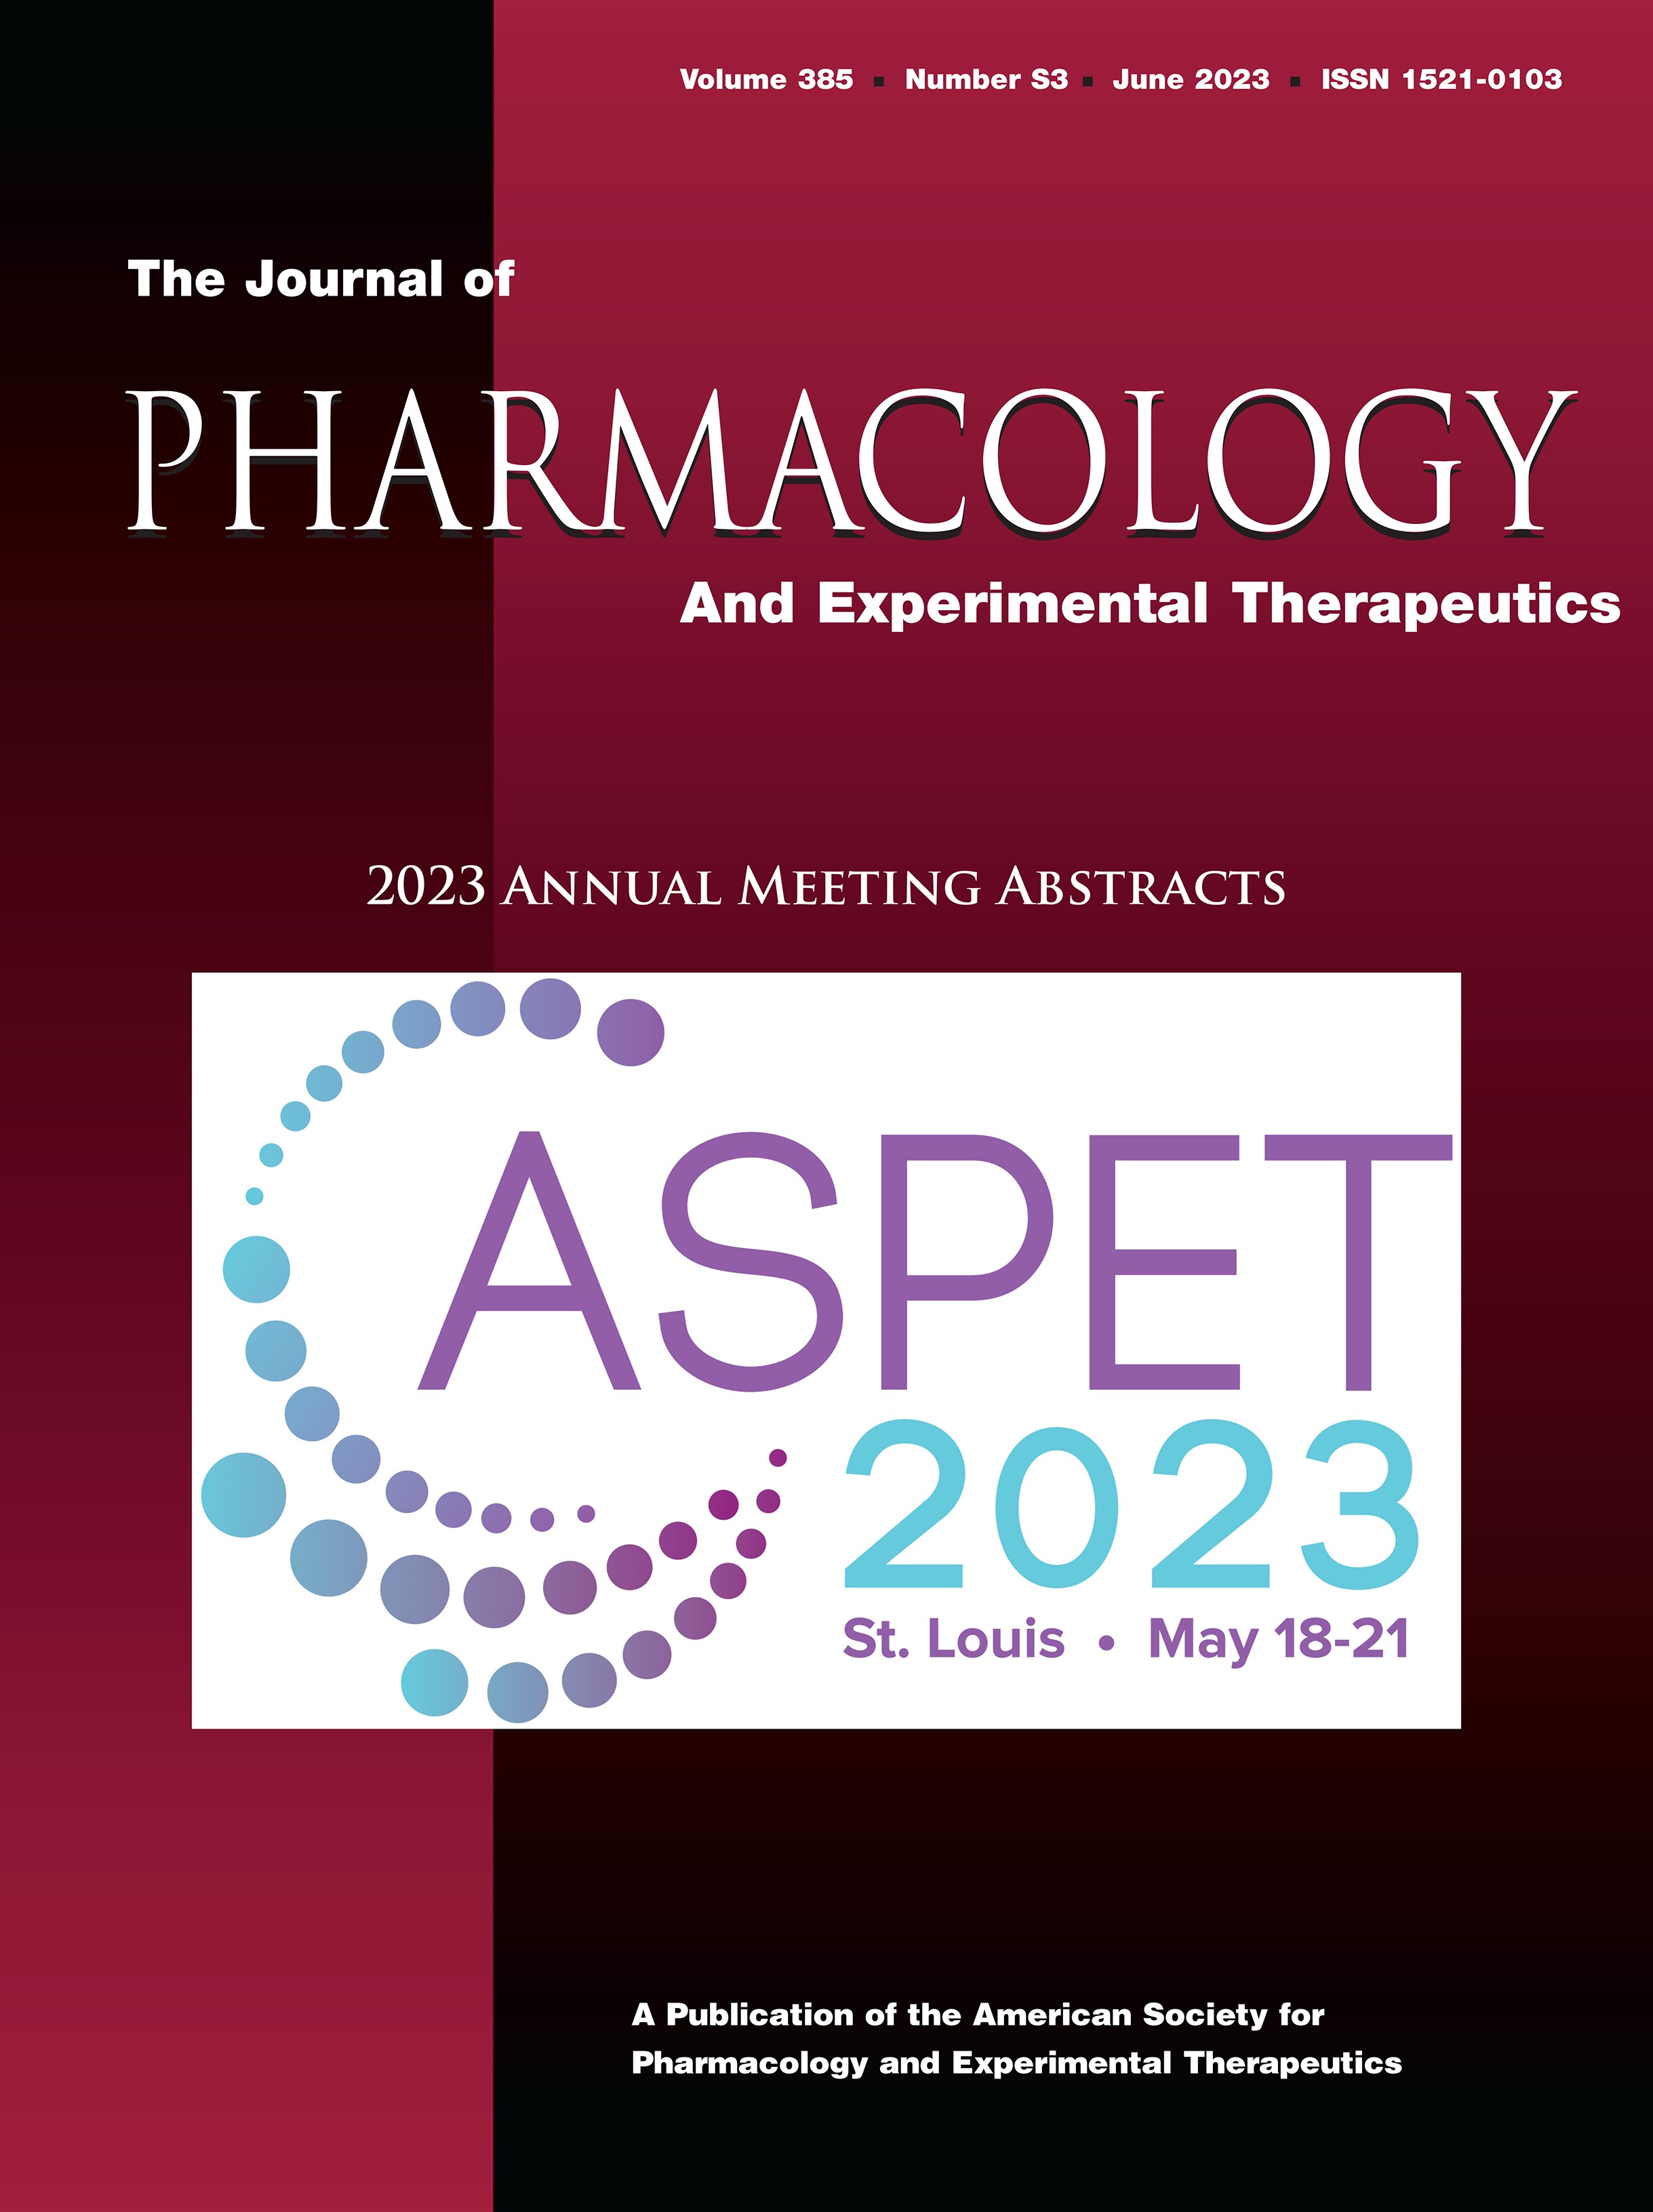 N-cadherin Signaling via PI3K{beta}-Akt3 Stabilizes Occludin Tight Junctions in the Blood-Brain Barrier [ASPET 2023 Annual Meeting Abstract - Cellular and Molecular Pharmacology]